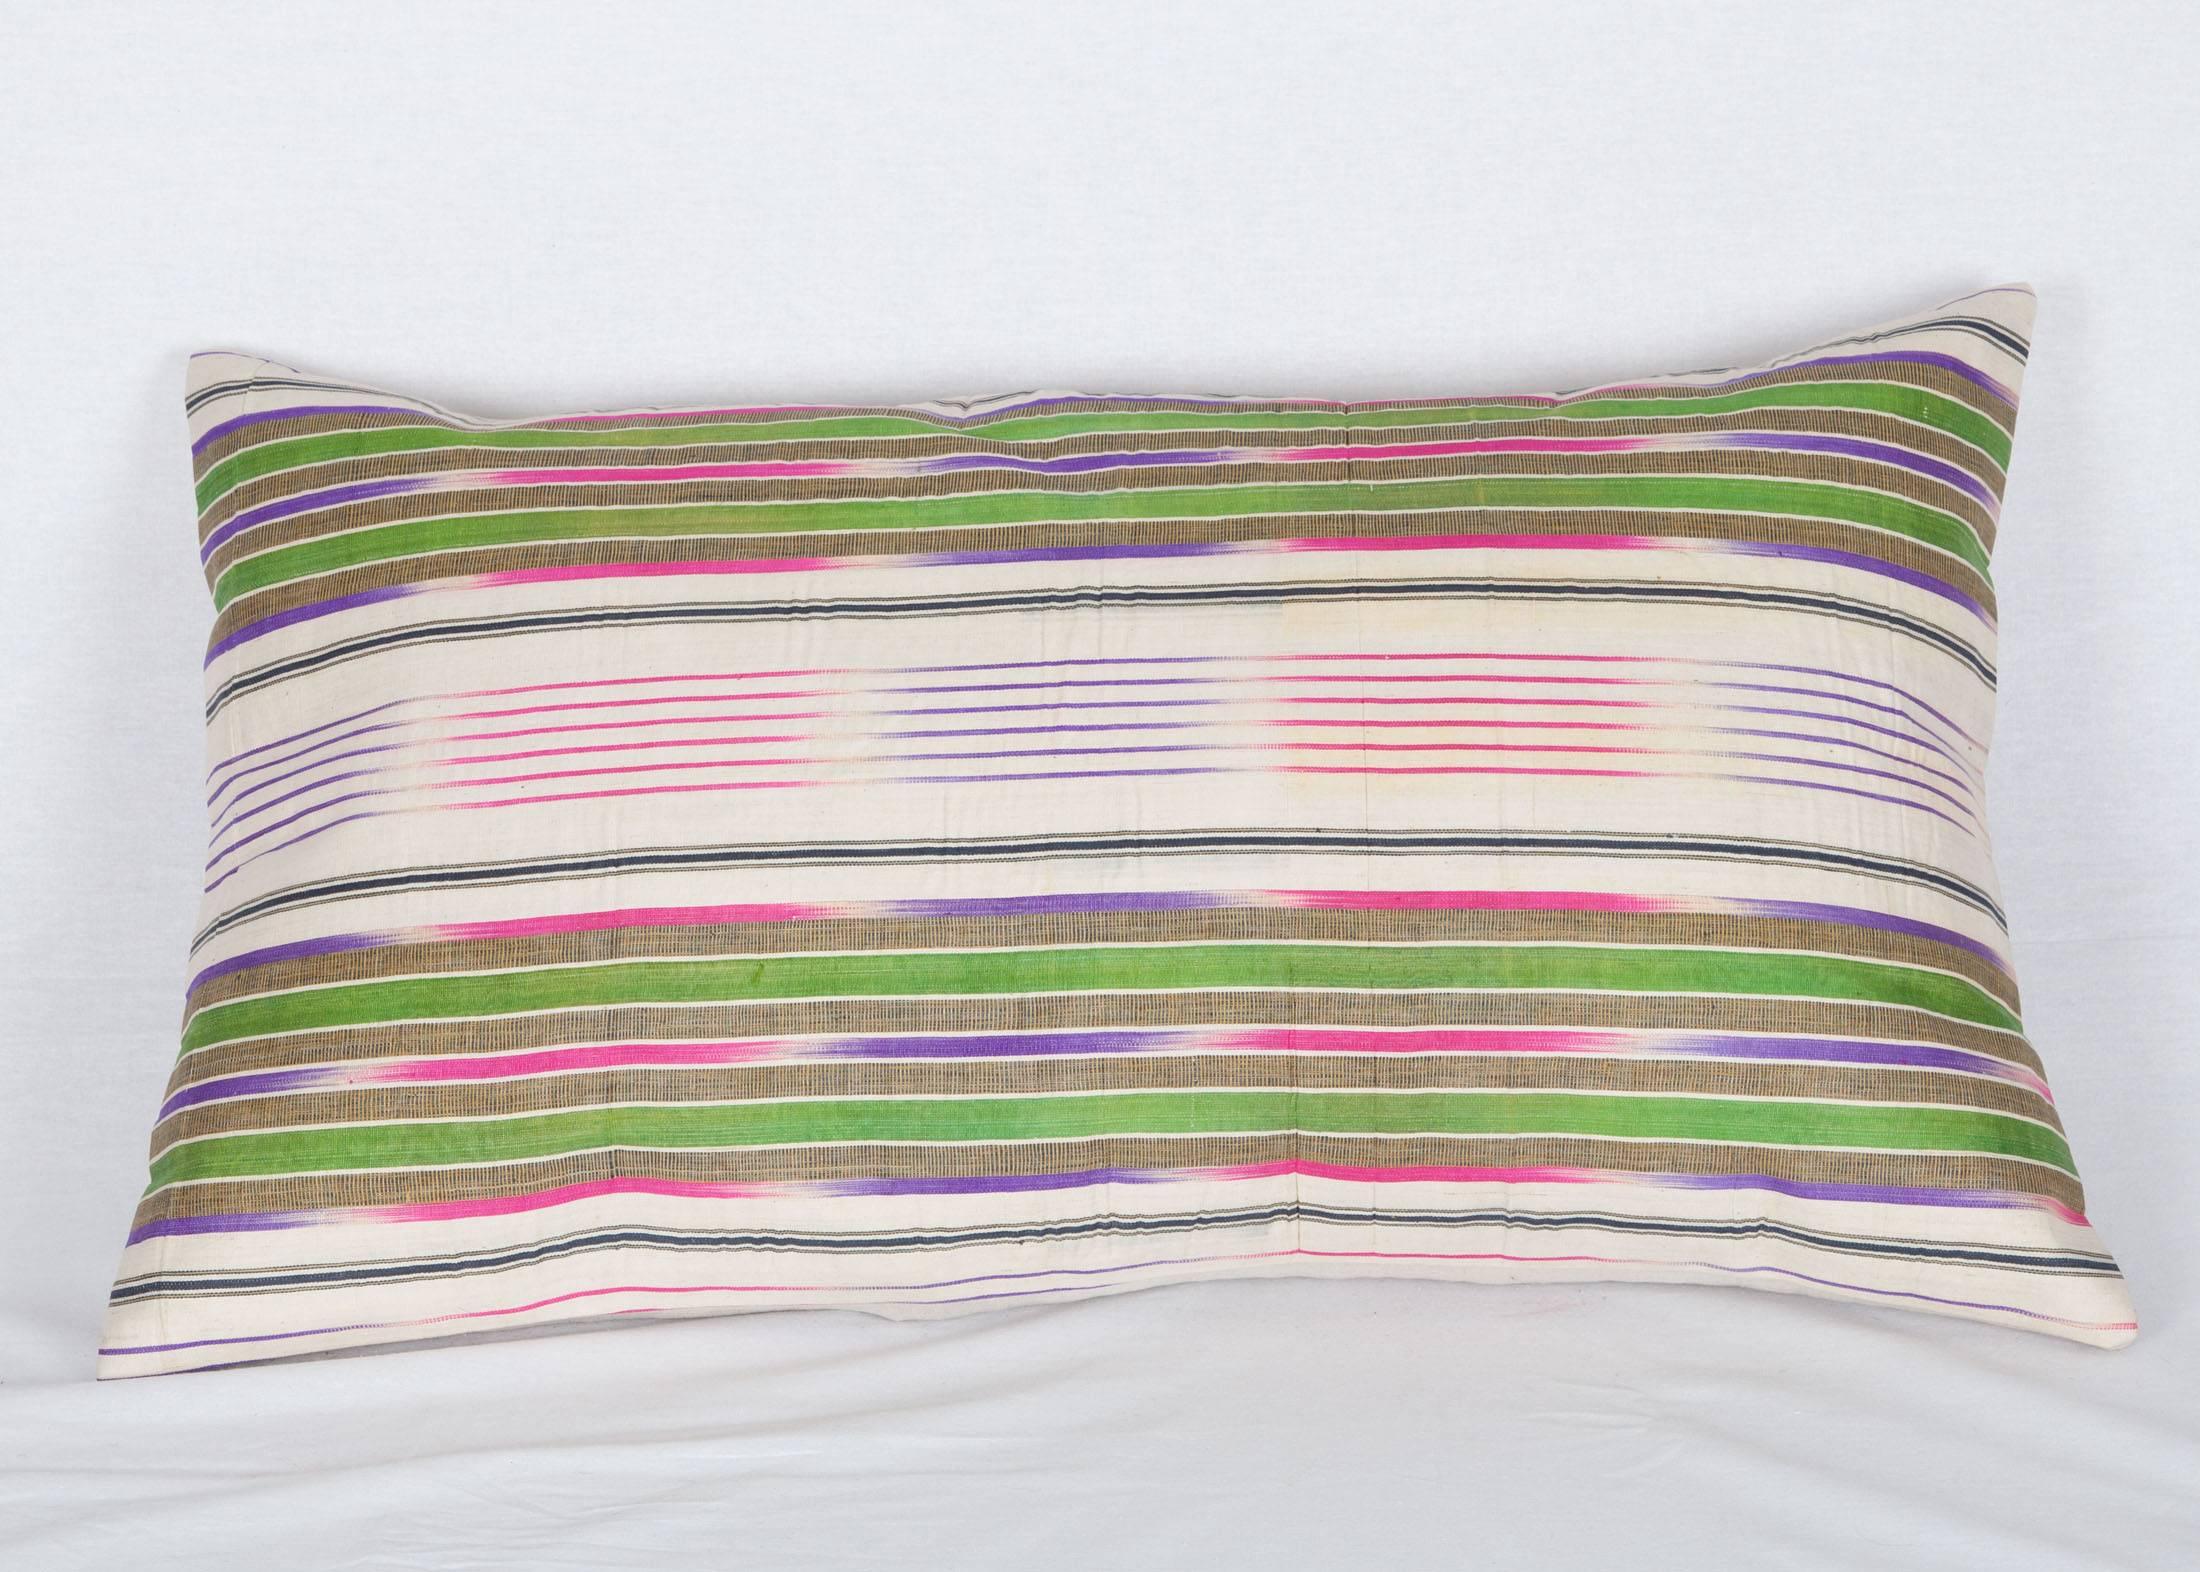 The pillow is made out of a early 20th century silk warp, cotton weft Ikat fabric.
It does not come with an insert but it comes with a bag made to the size and out of cotton to accommodate the filling.
The backing is made of linen.

Please note